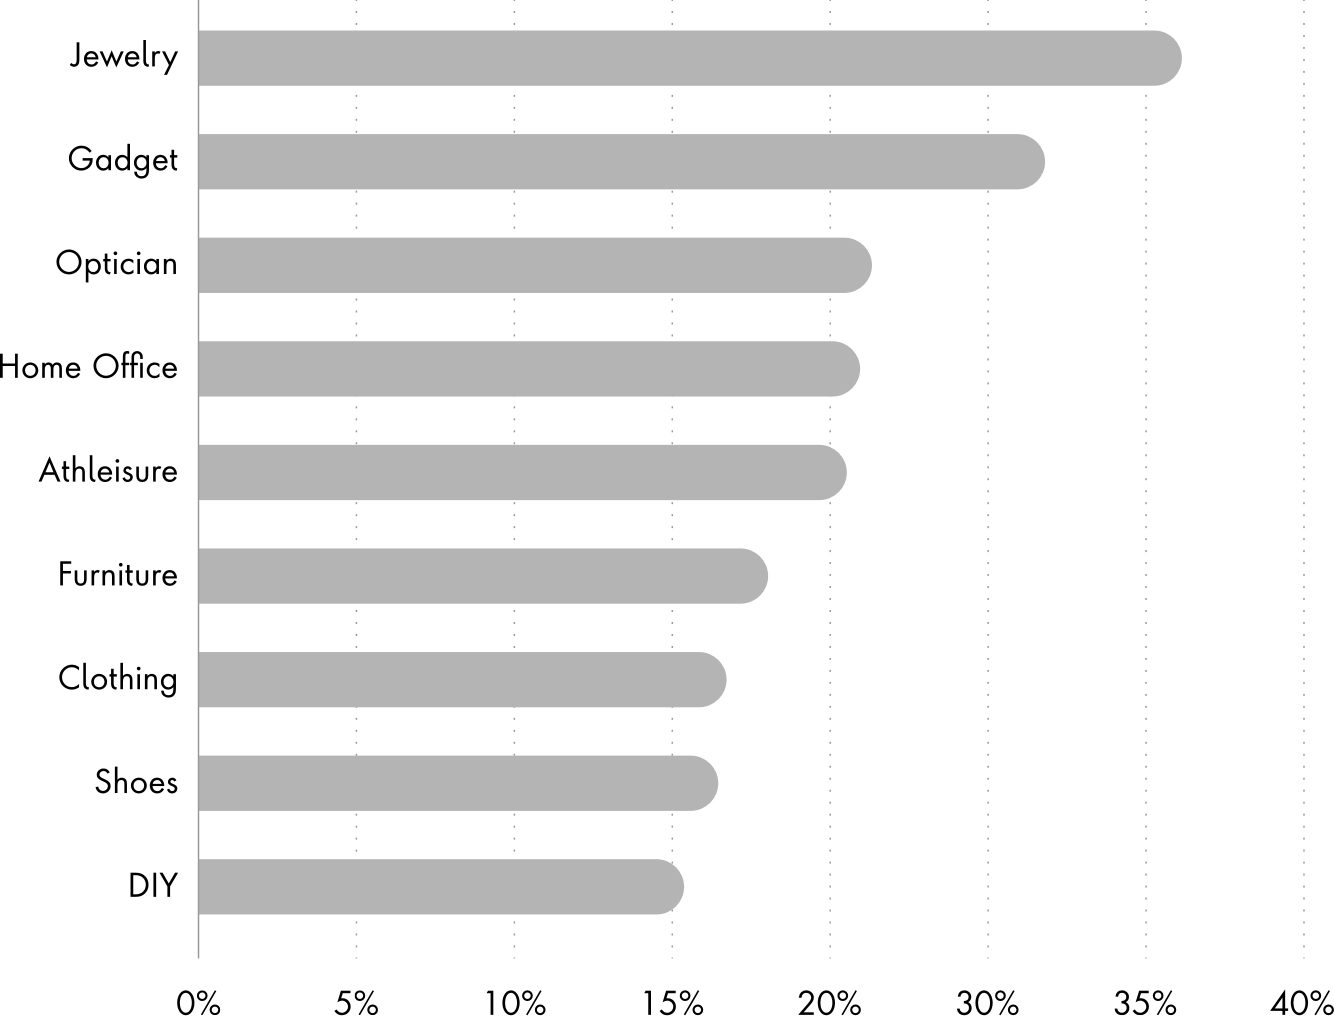 Bar chart showing preference by sector for mobile checkout options at retailers